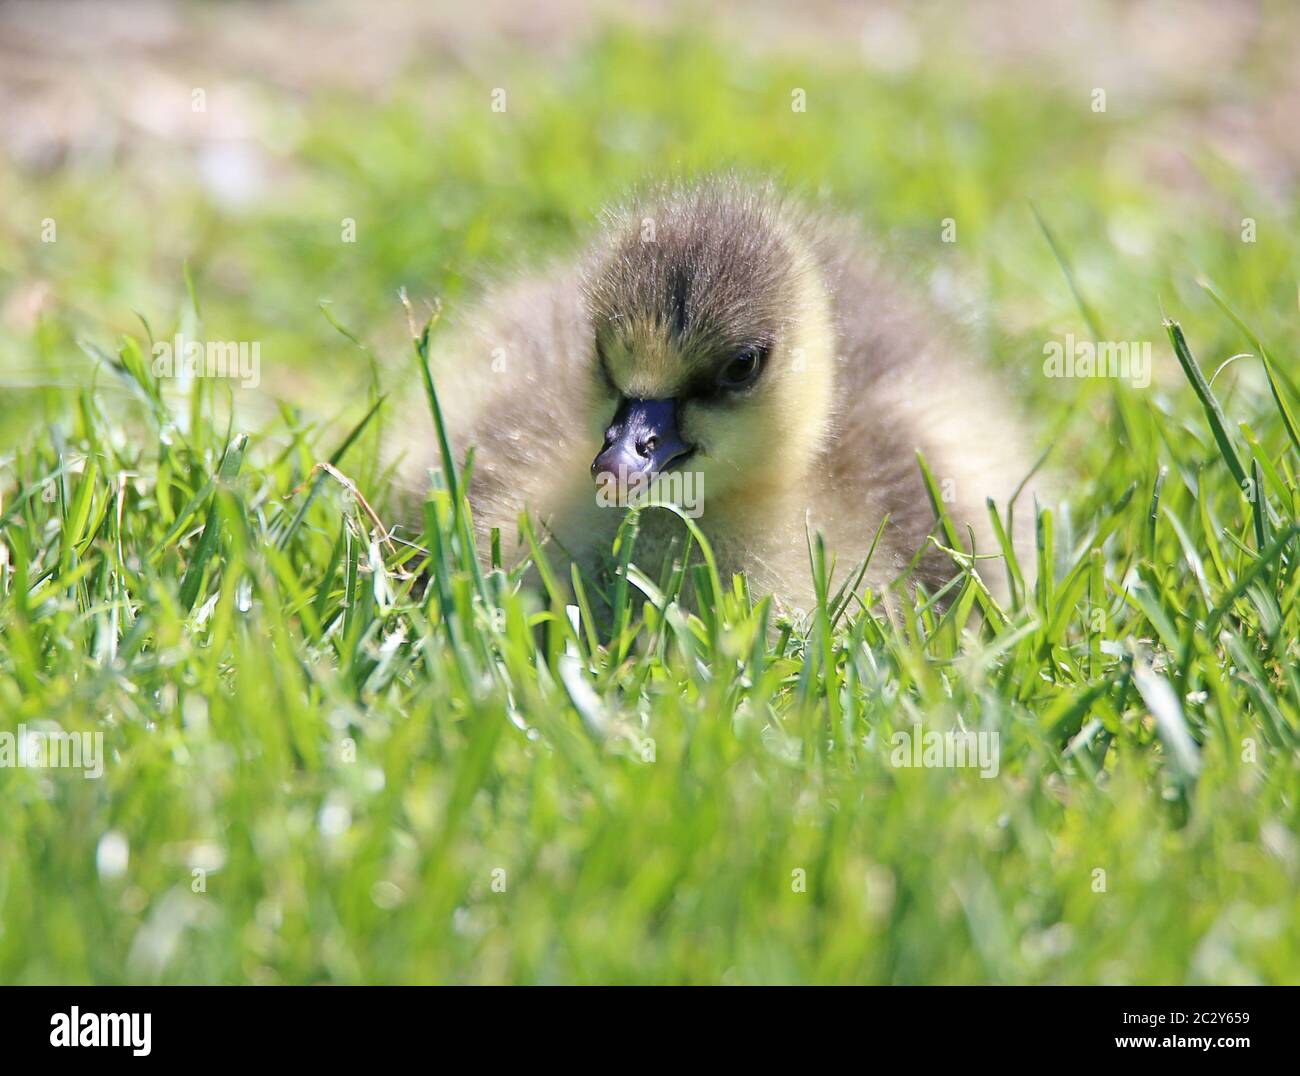 Young GÃ¶ssel of the short-billed goose Anser brachyrhynchus Stock Photo